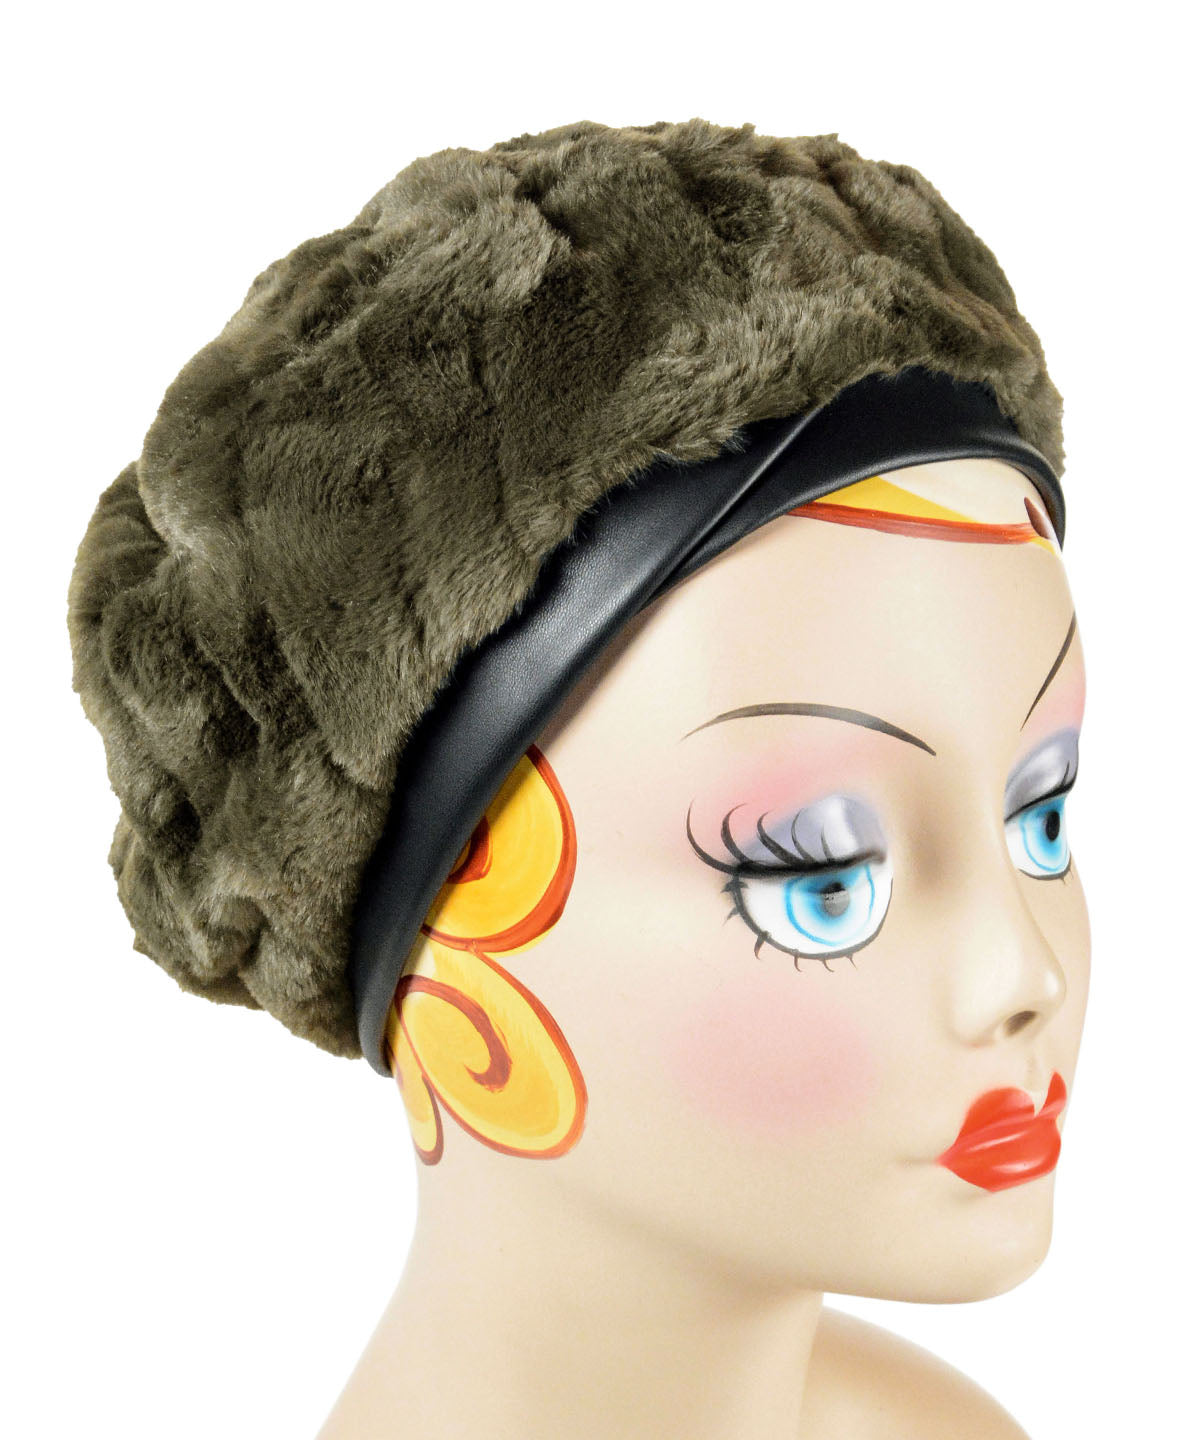 Beret Reversible shown in Cuddly Army Green by Pandemonium Seattle. Handmade in America.